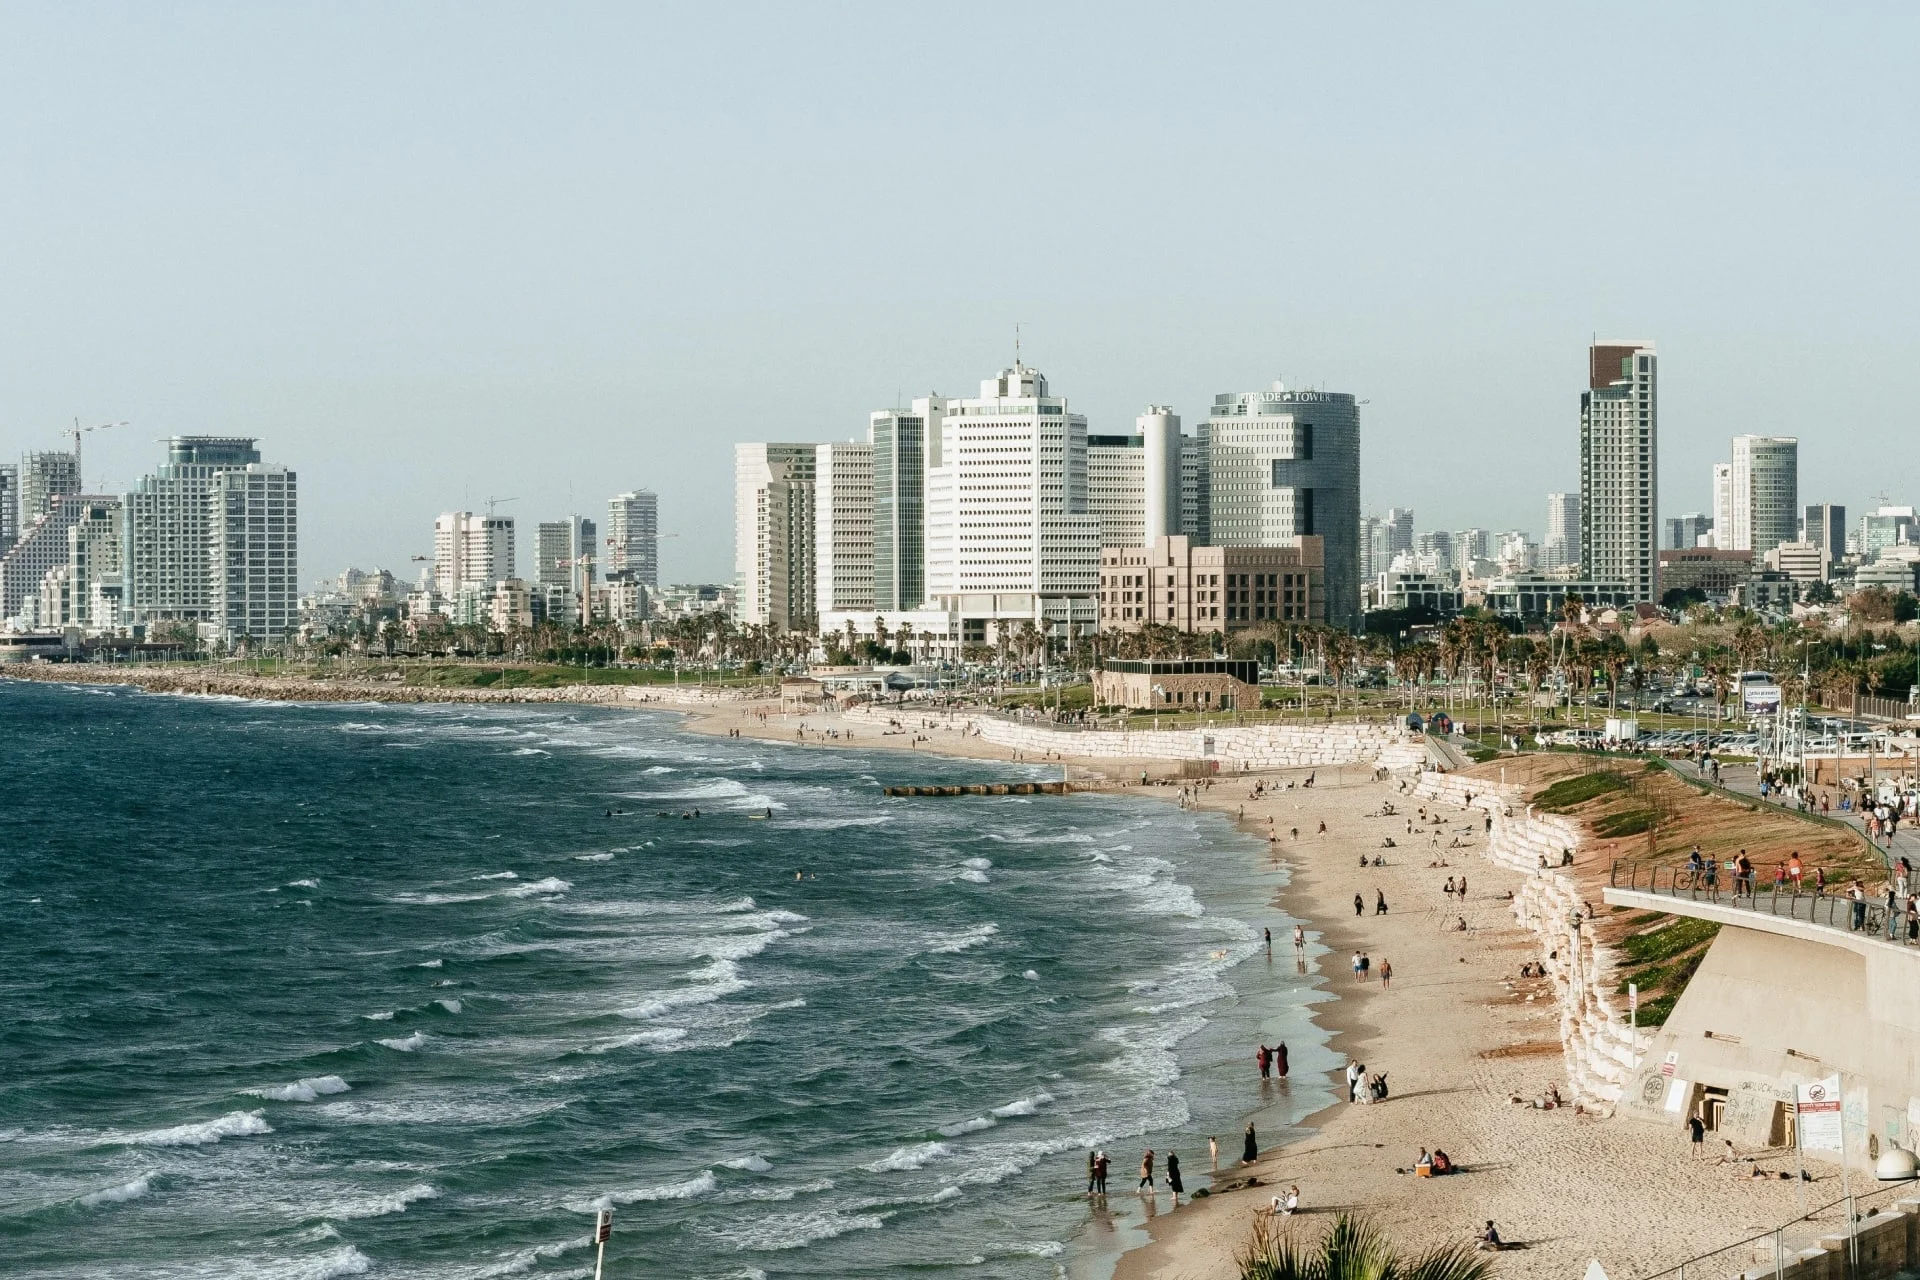 A view of the beach and city in tel aviv.